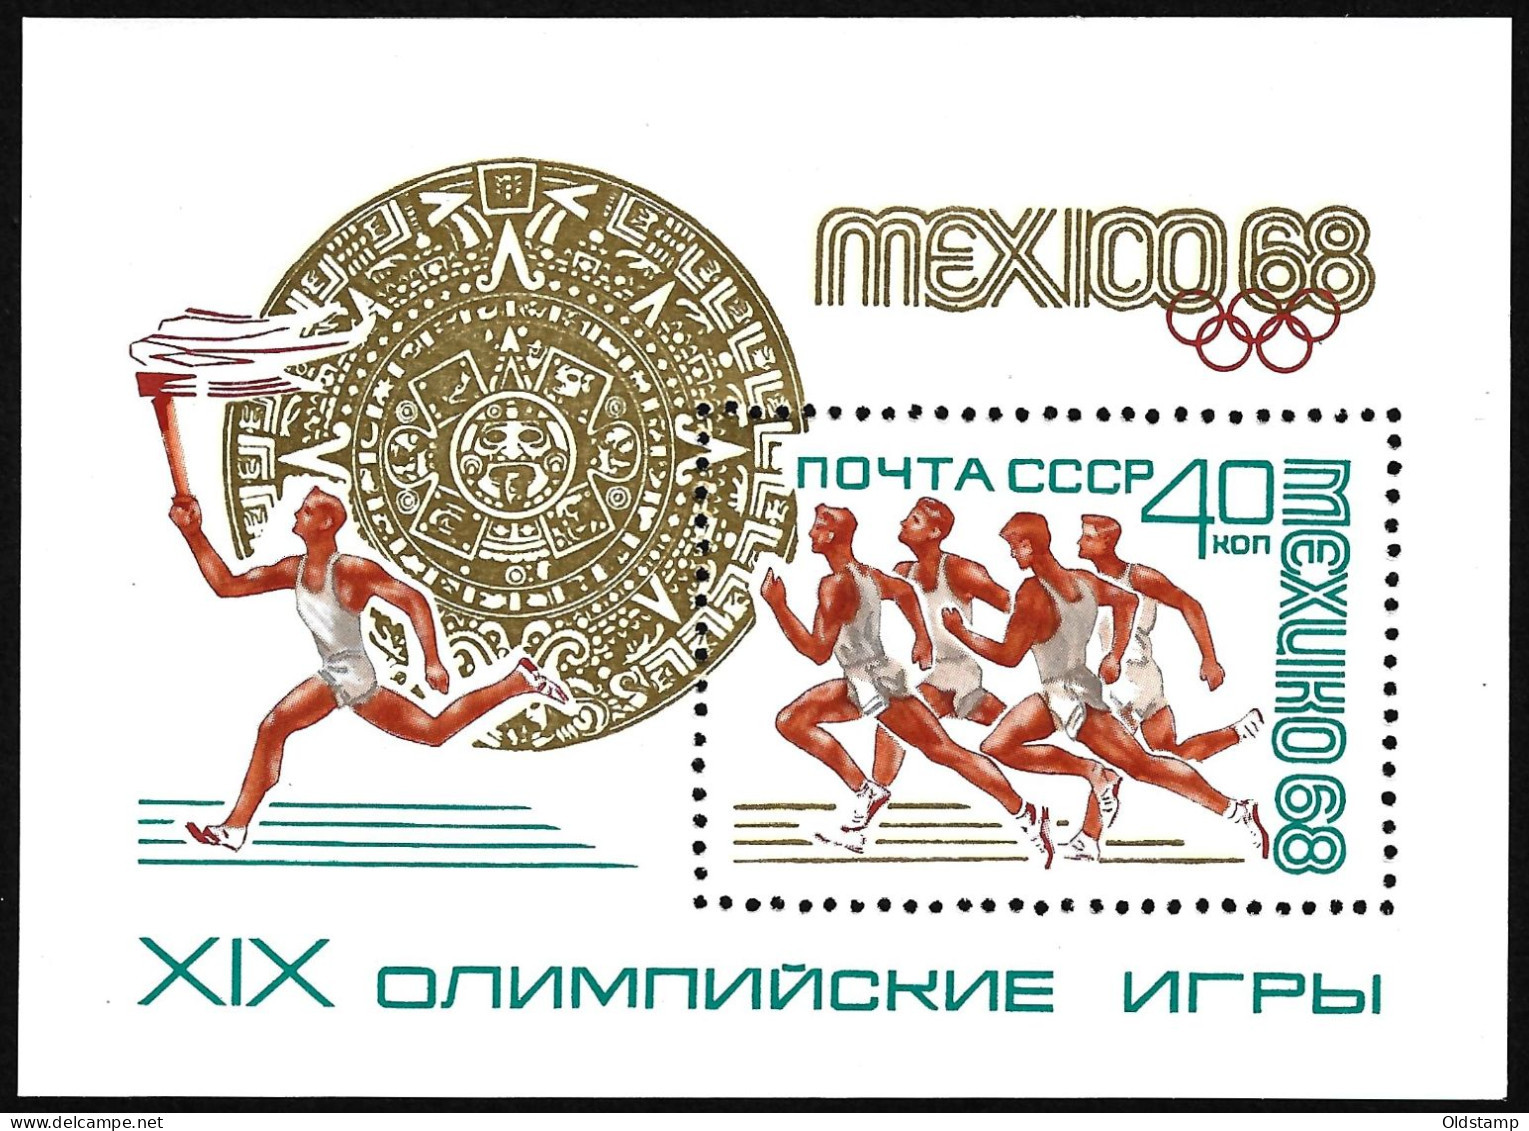 USSR 1968 MNH LUXE Soviet Union 40k. Sport XIX Olimpic Games In Mexico Athletics MNH Stamp Mi. Block # - Estate 1968: Messico